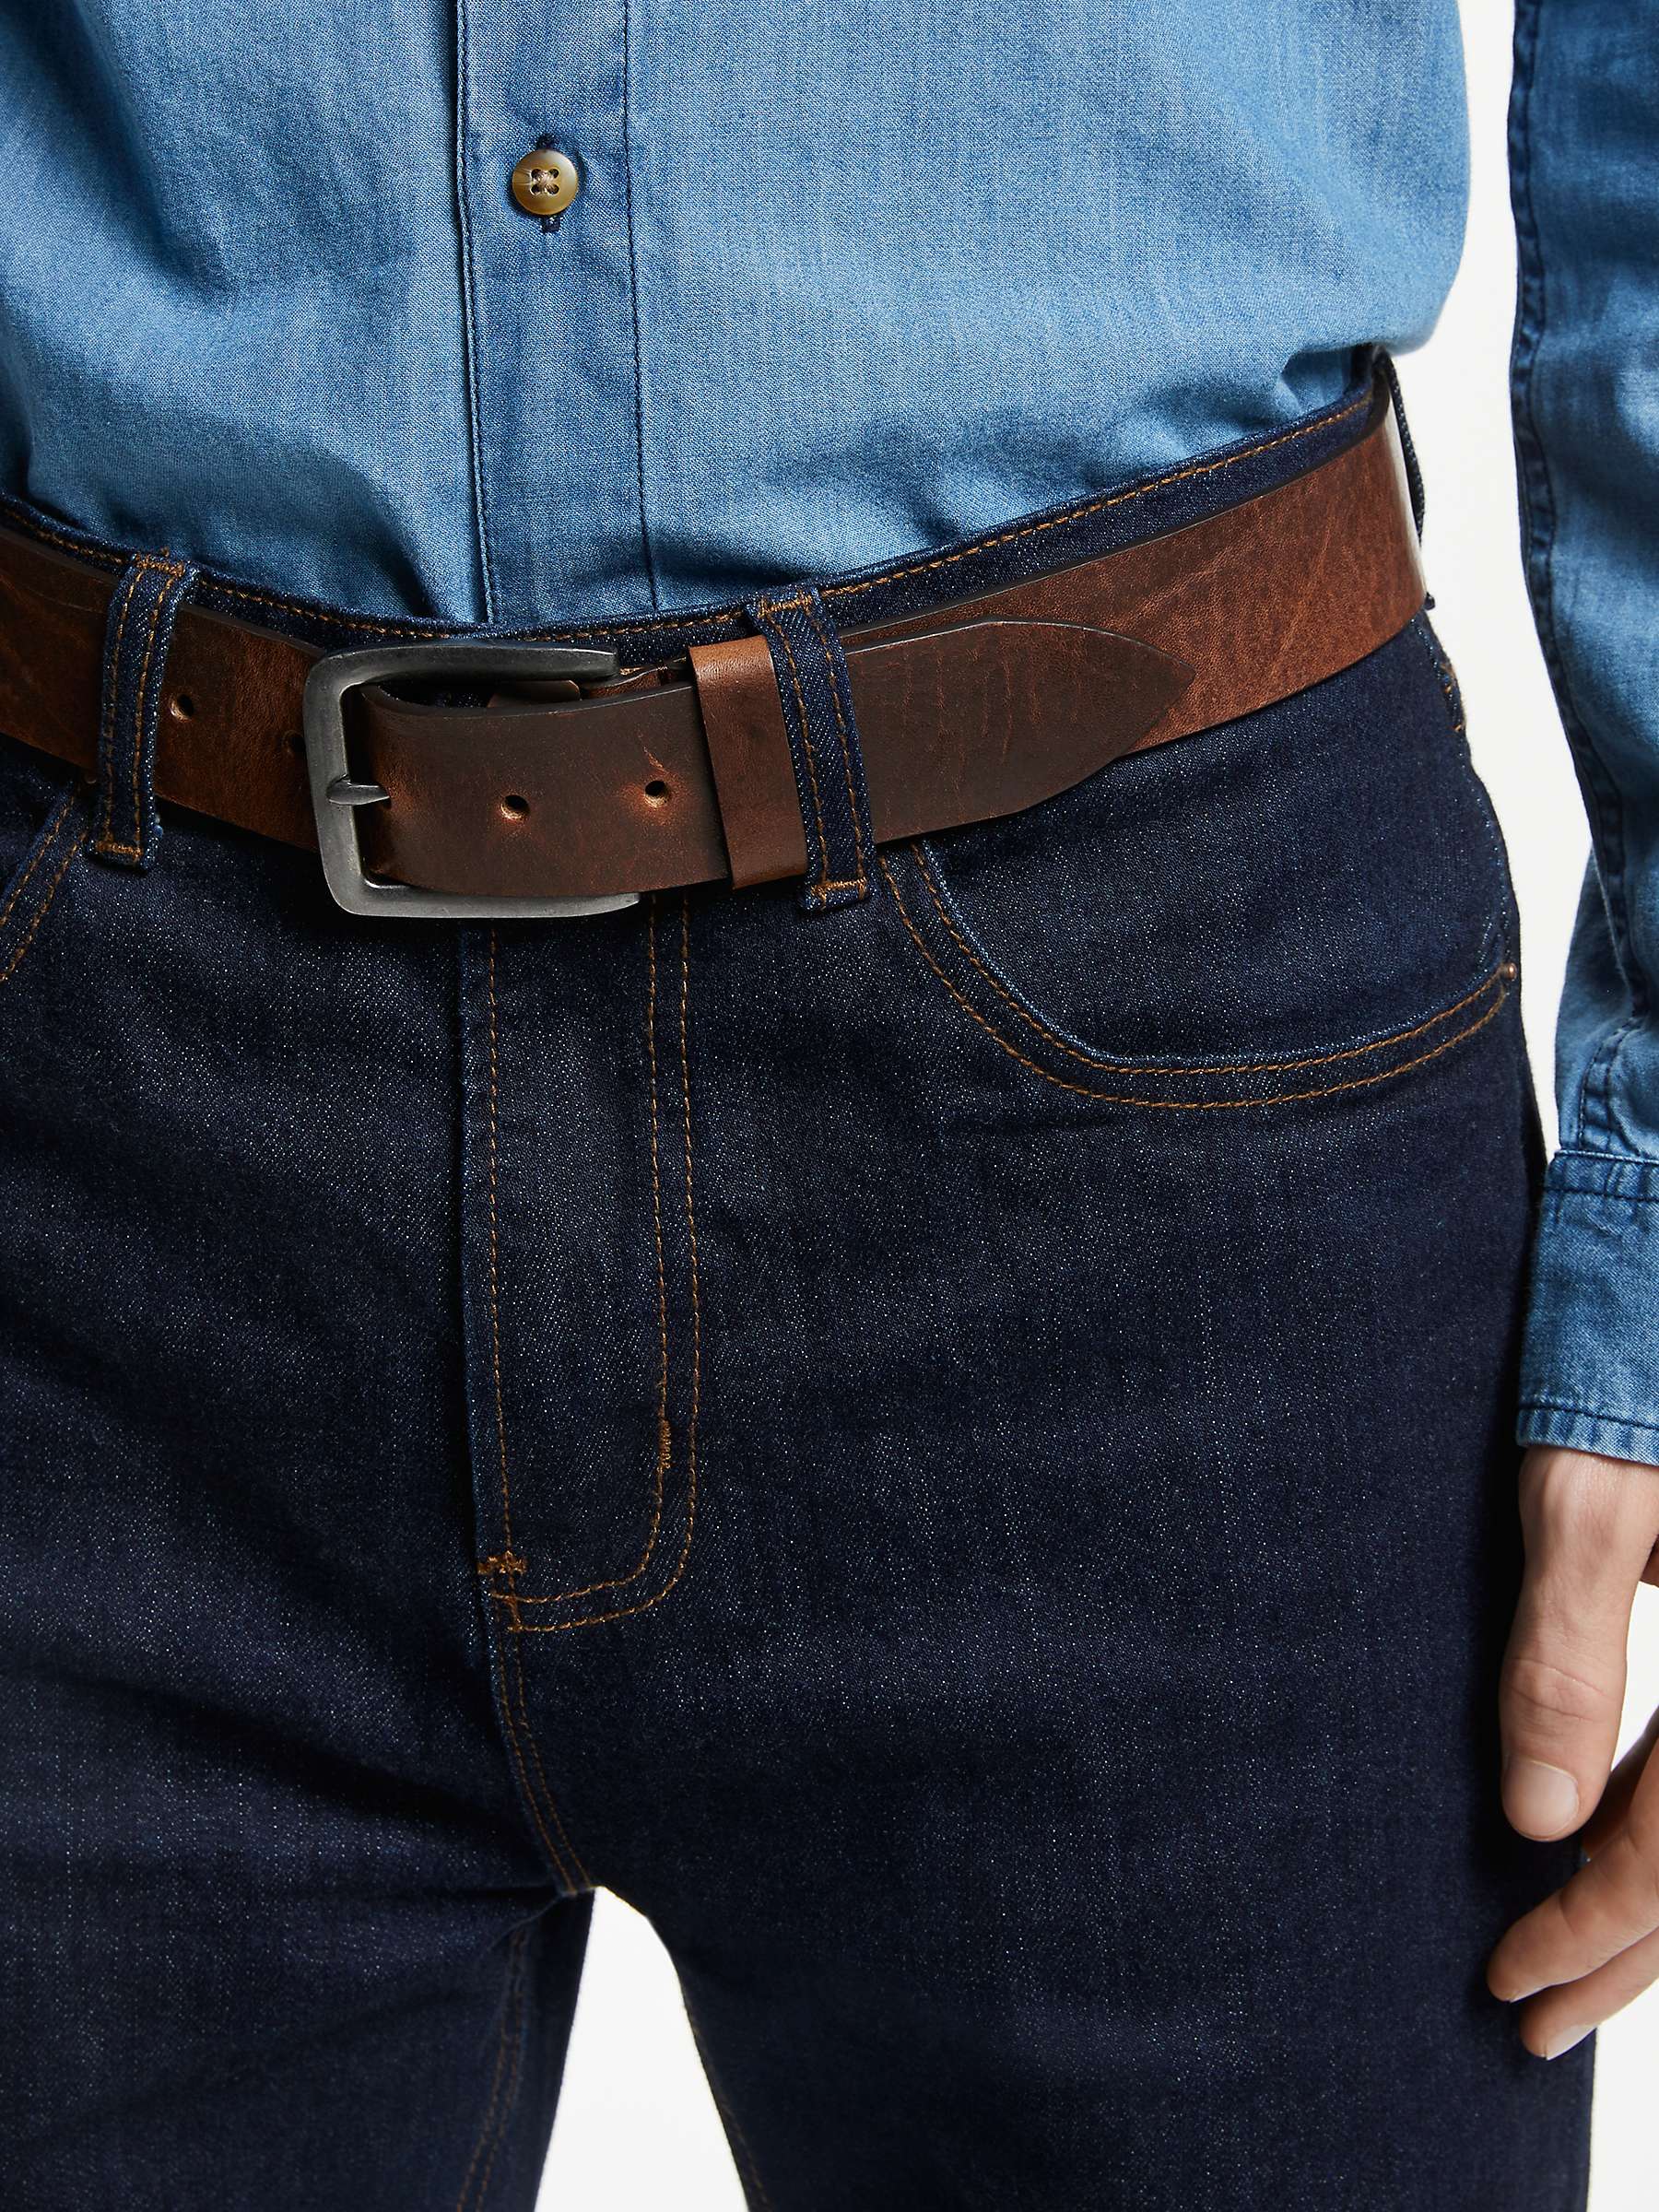 Buy John Lewis Made in Italy Leather Jeans Belt Online at johnlewis.com